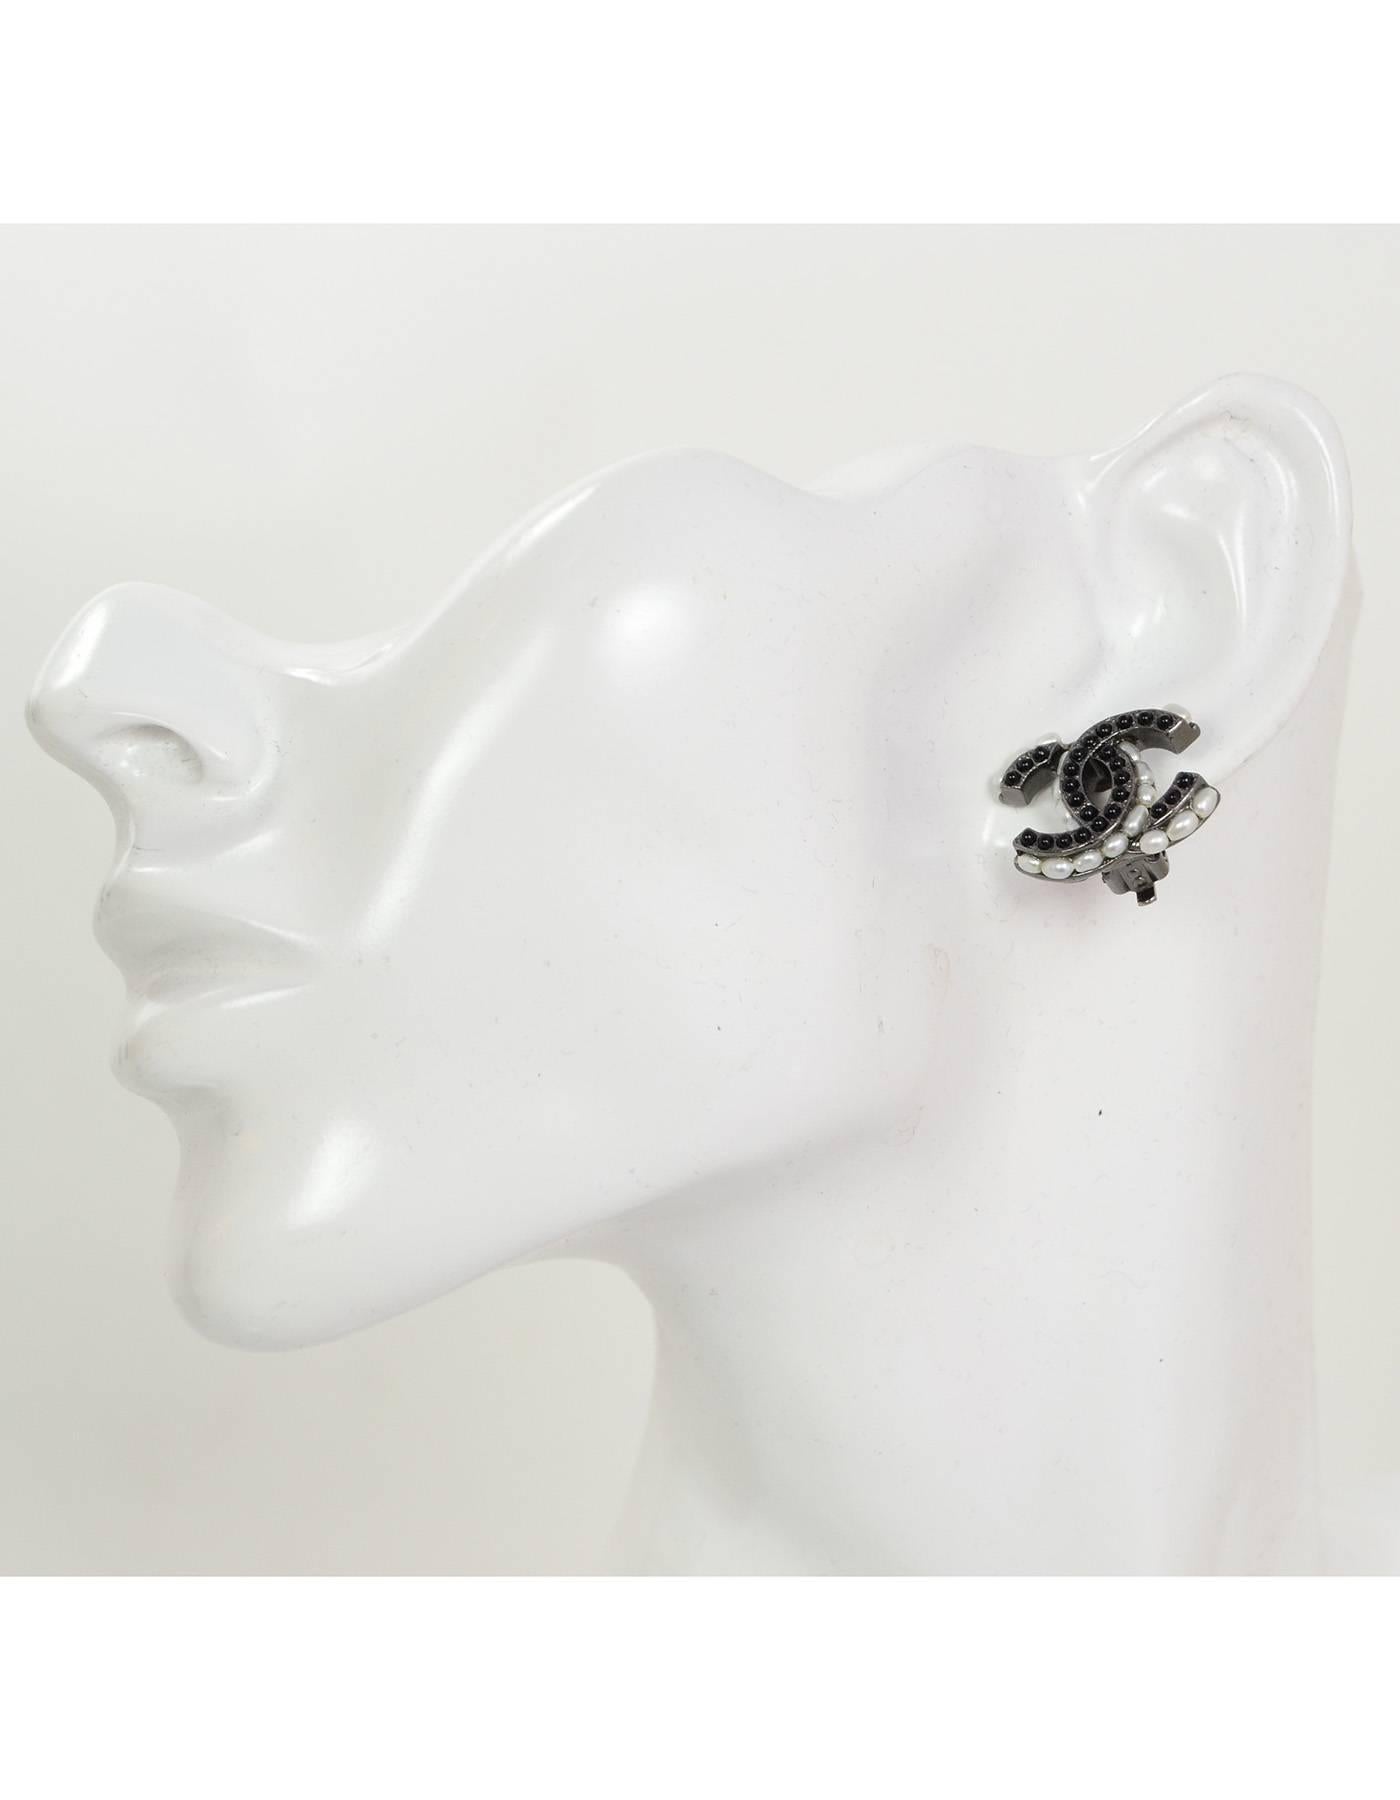 Chanel Black and Ivory Faux Pearl CC Clip-On Earrings

Made In: France
Year of Production: 2015
Color: Black and ivory
Materials: Faux pearl and metal
Closure: Clip on
Stamp: Chanel A15 CC B Made in France
Overall Condition: Excellent pre-owned